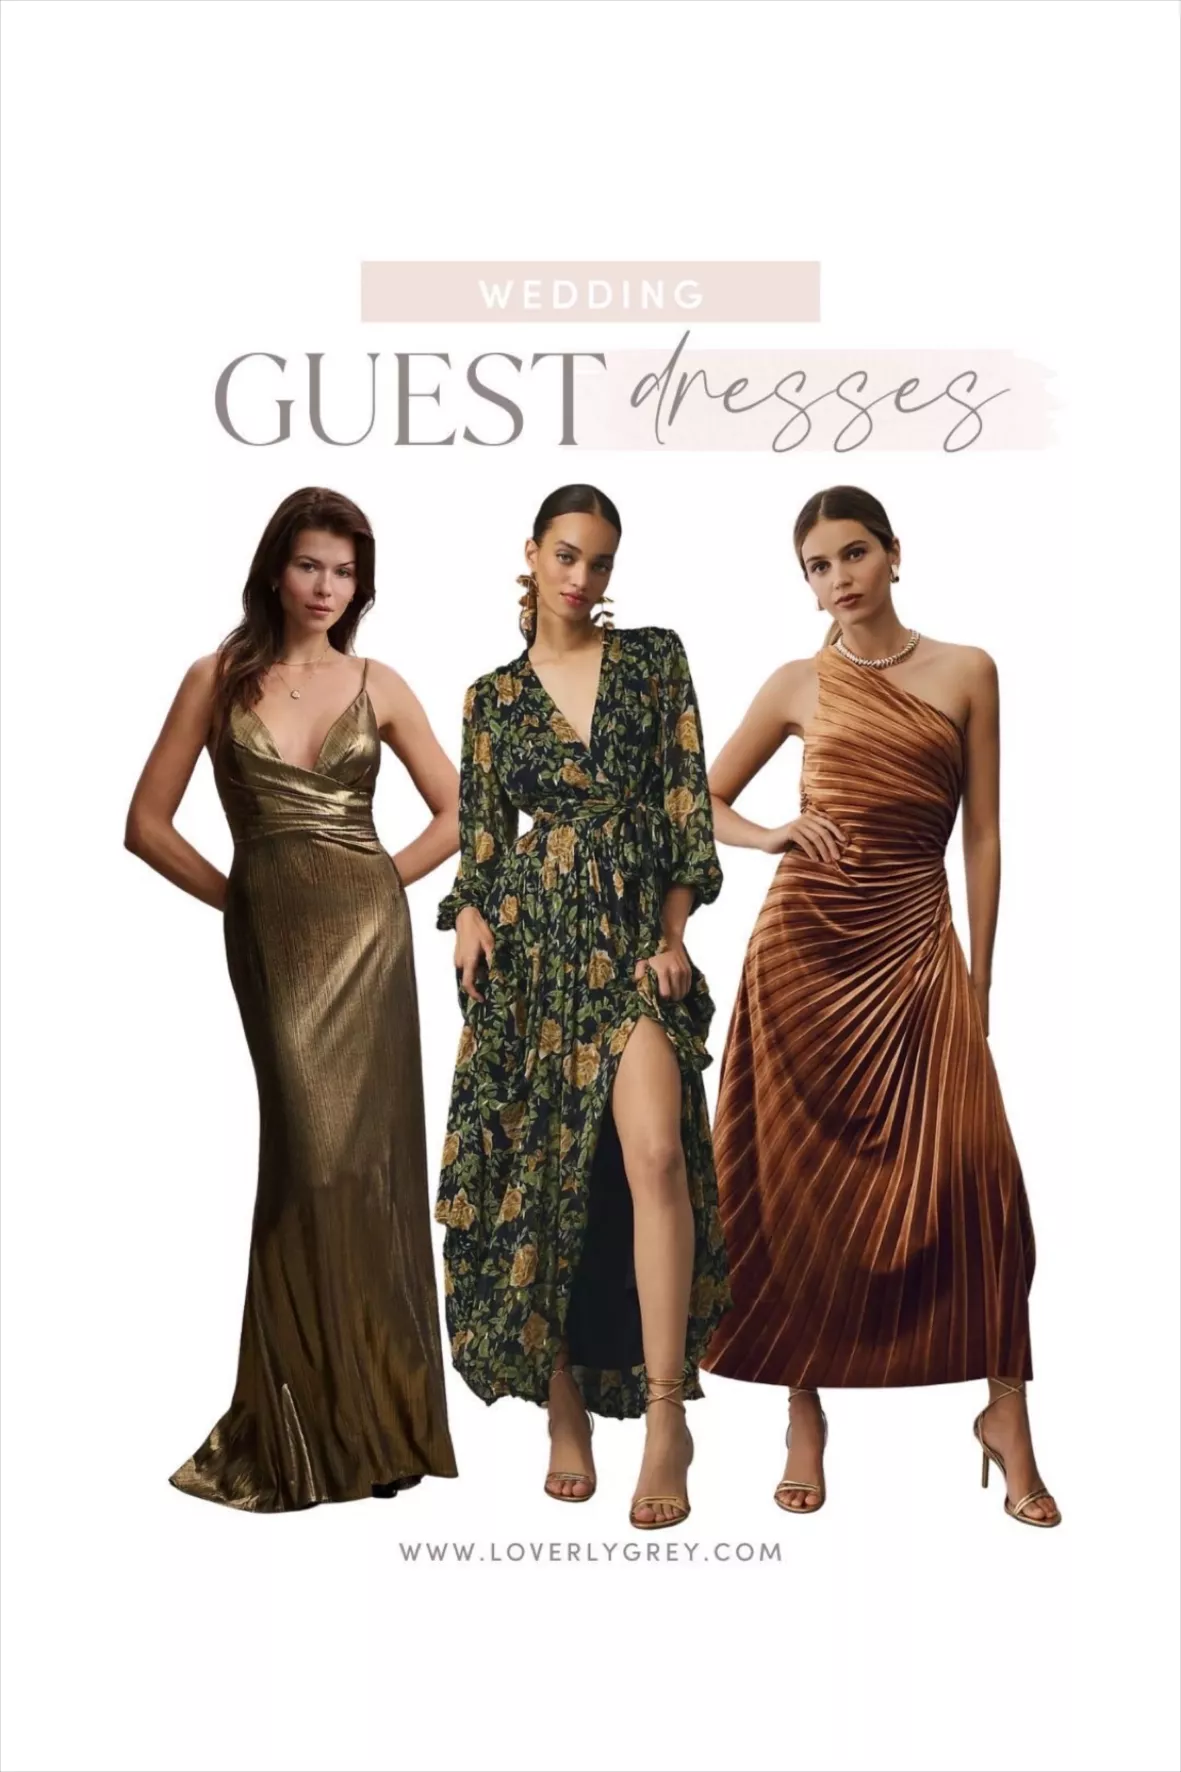 Wedding Guest Outfits - SBK Living